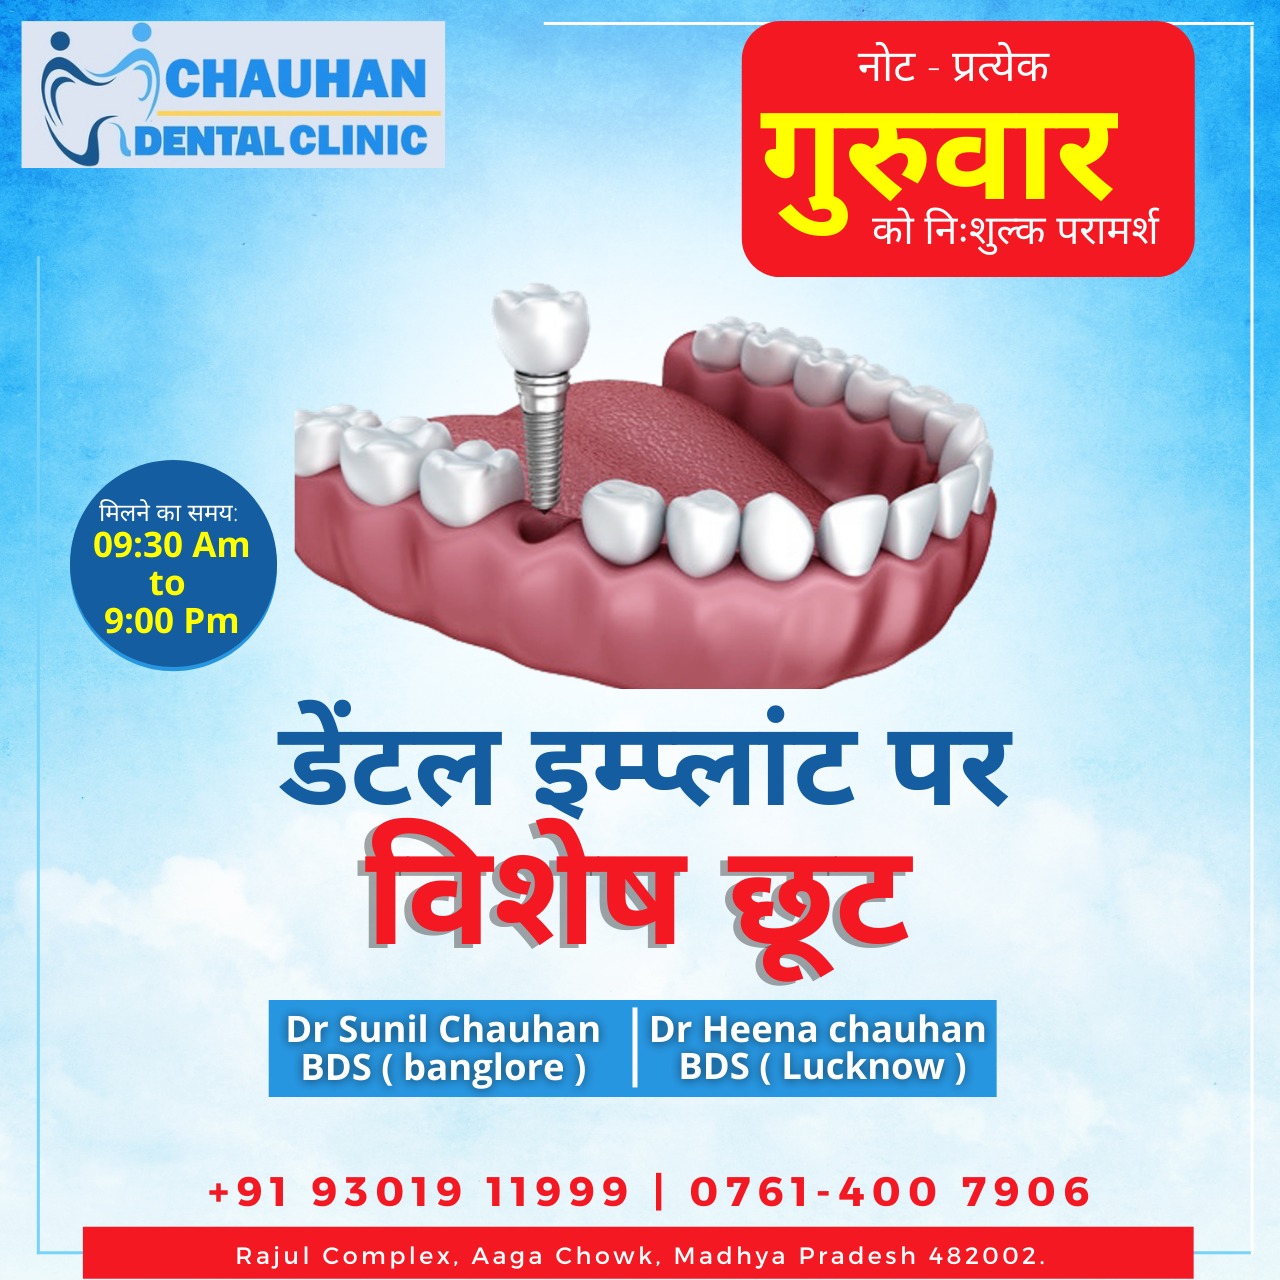 Operating Hours of Dr. Chauhan's Dental Clinic